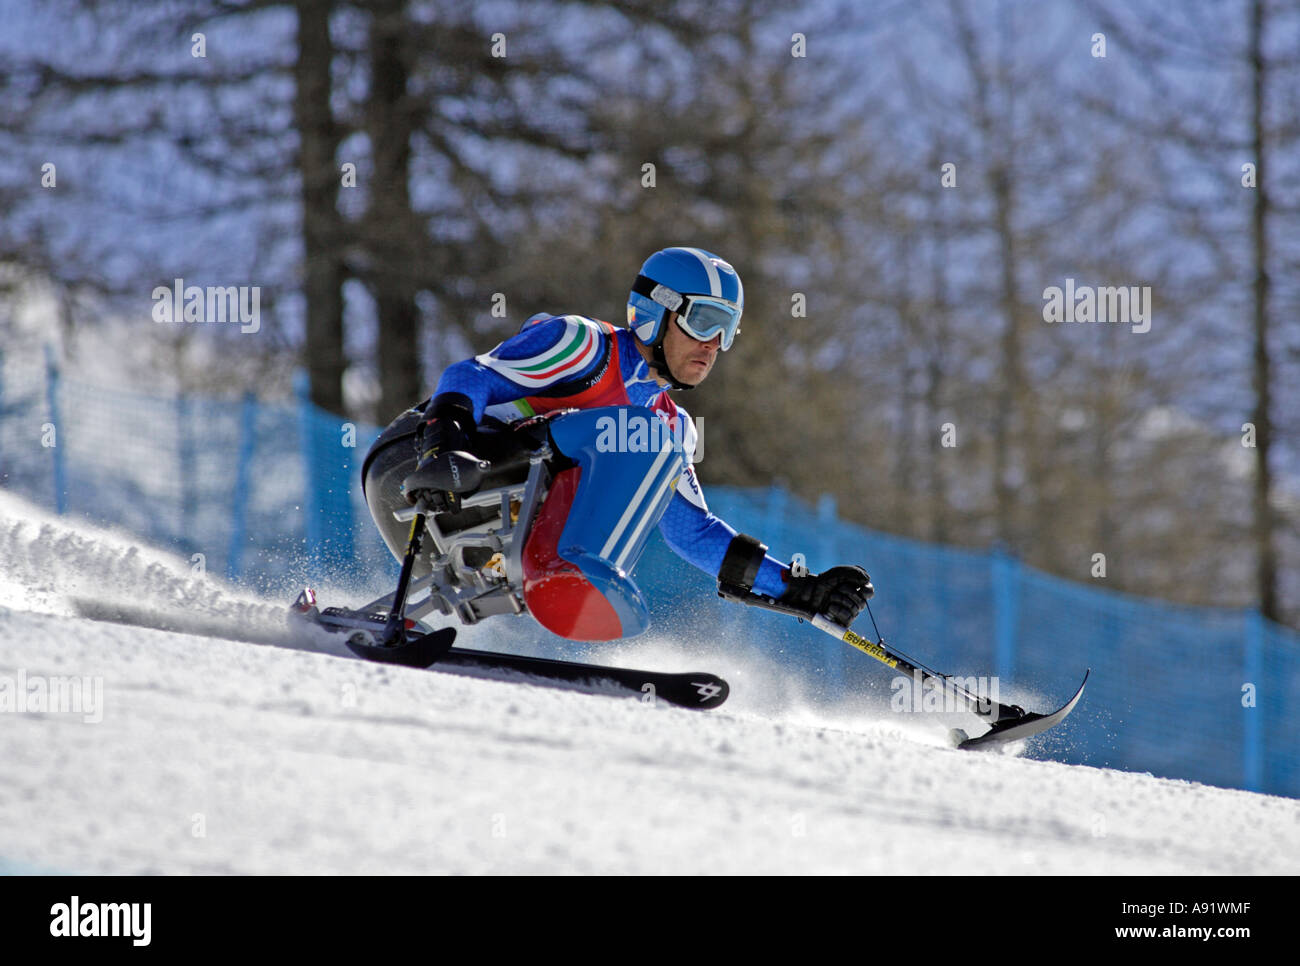 Emanuele Pagnini LW12 1 of Italy in the Mens Alpine Skiing Super G Sitting competition Stock Photo